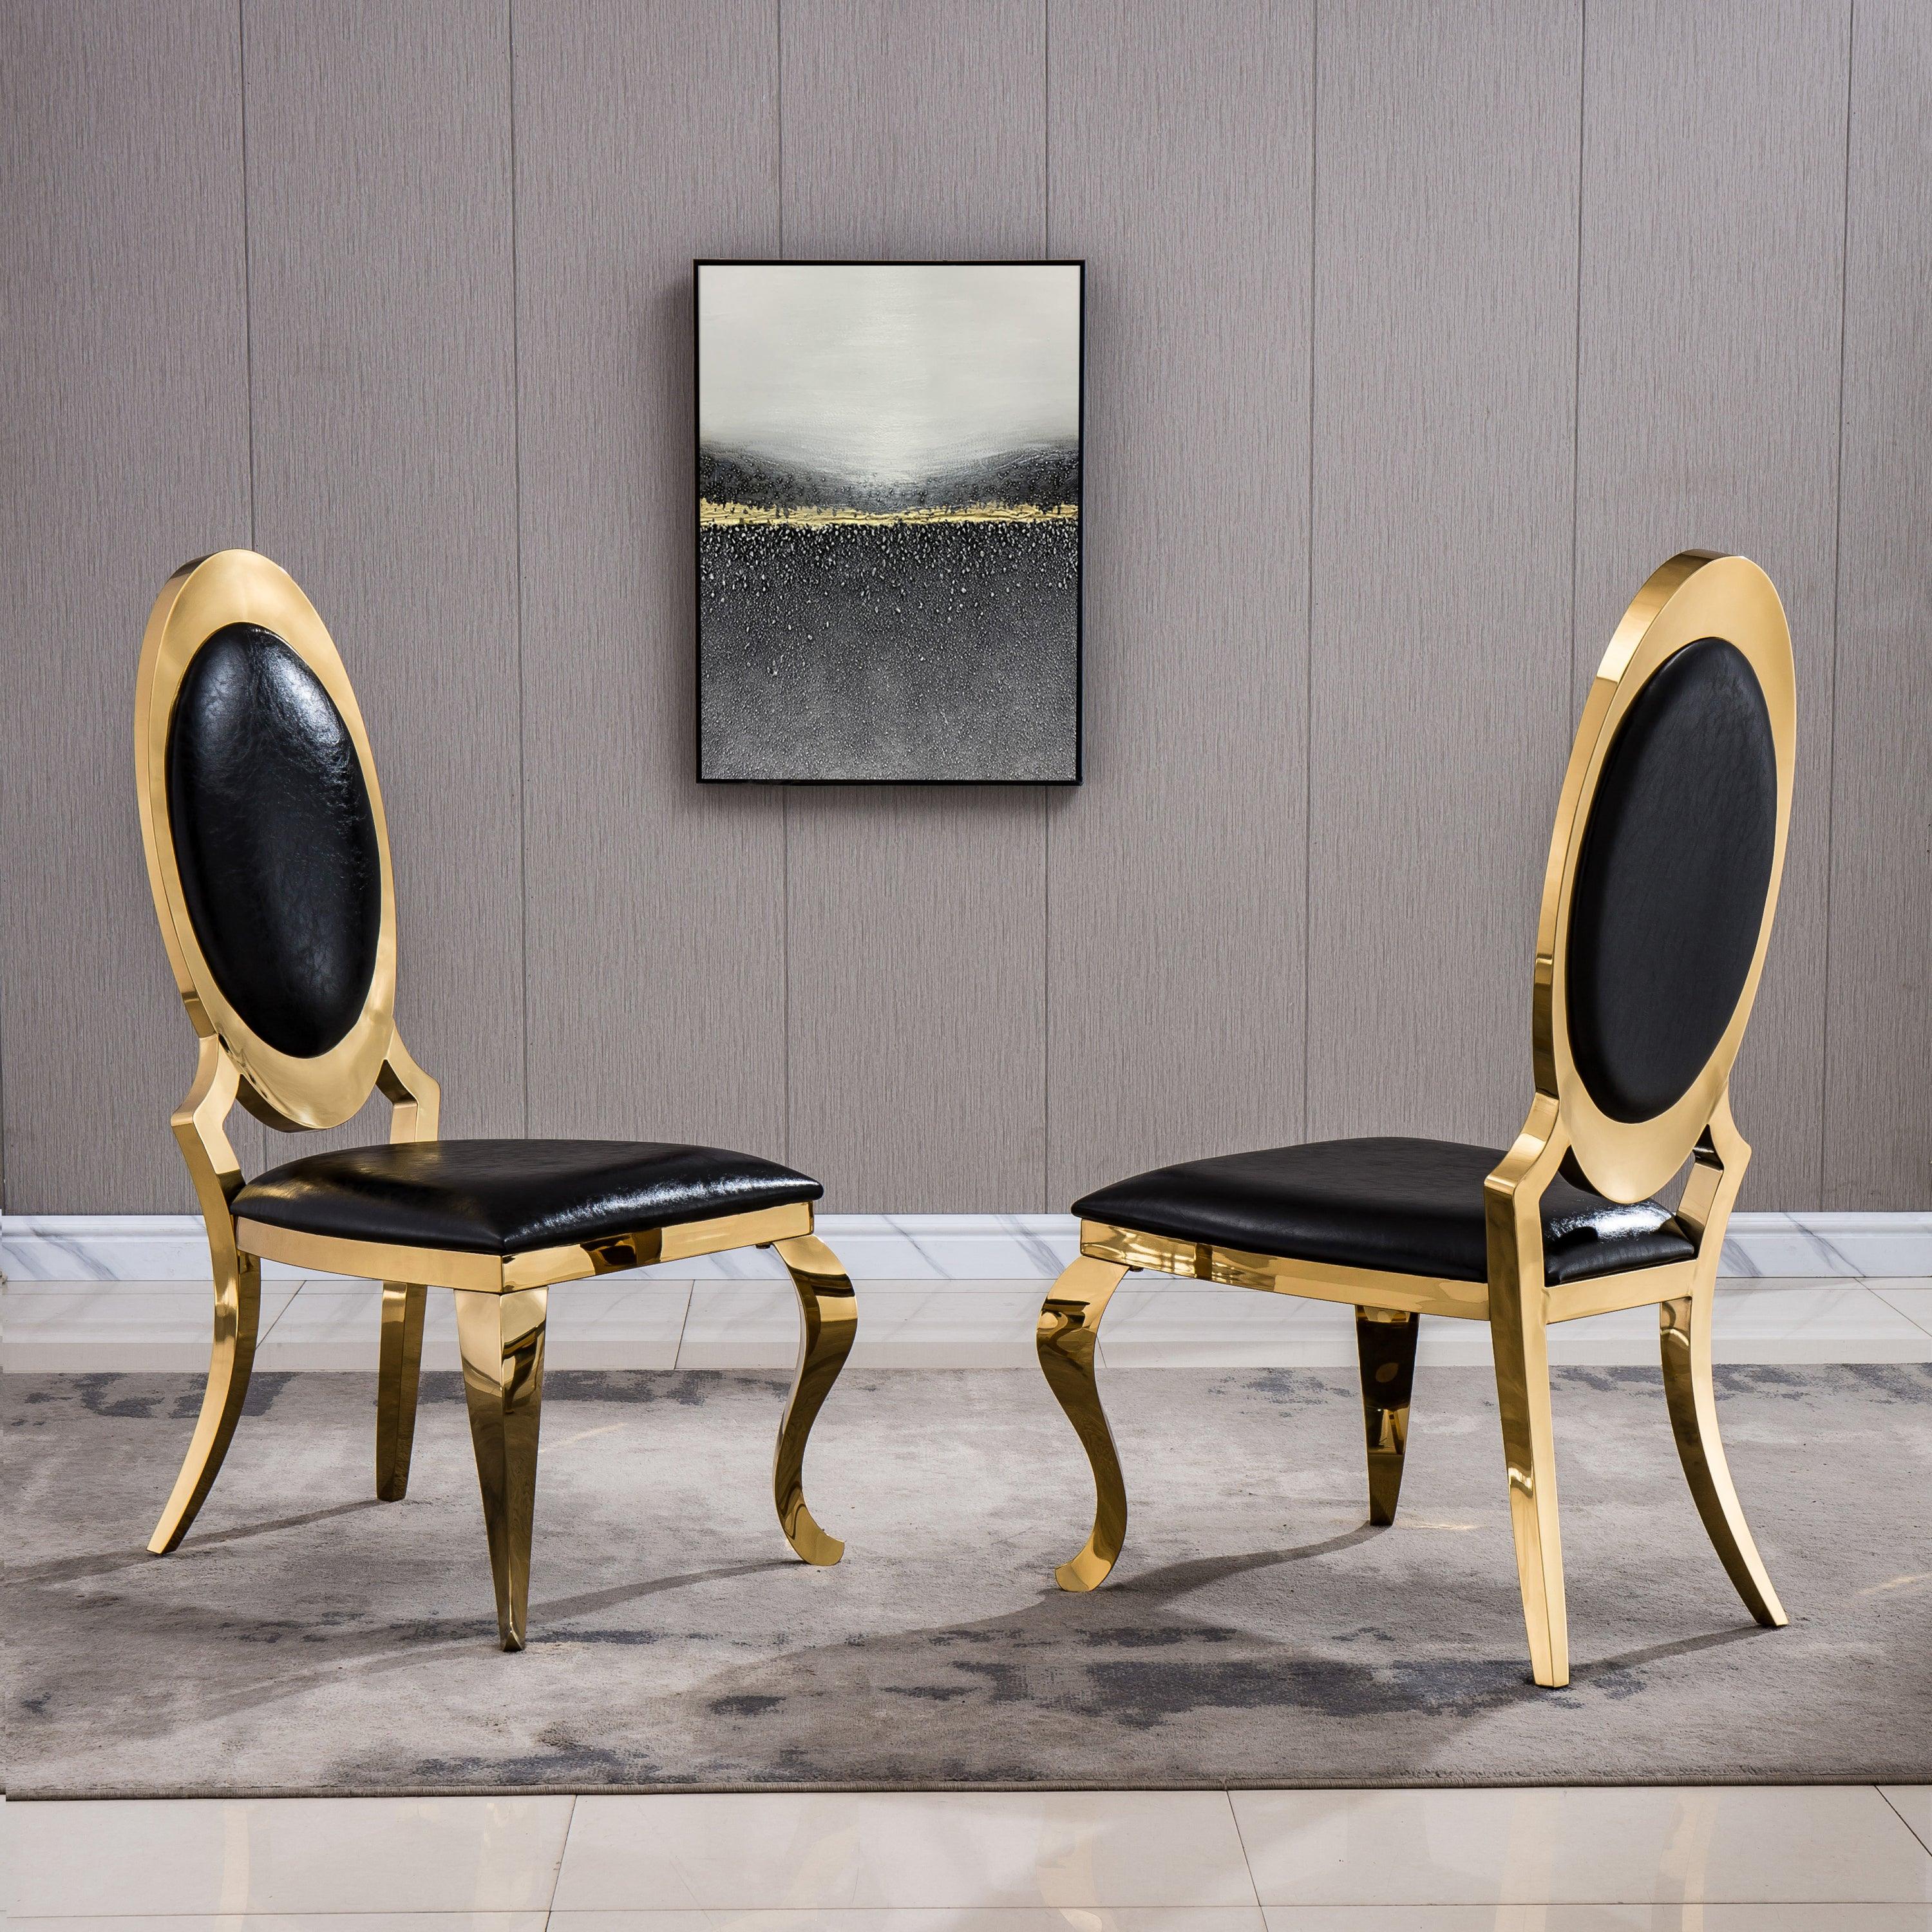 🆓🚛 Leatherette Dining Chair With Oval Backrest Set Of 2, Stainless Steel Legs, Black & Gold